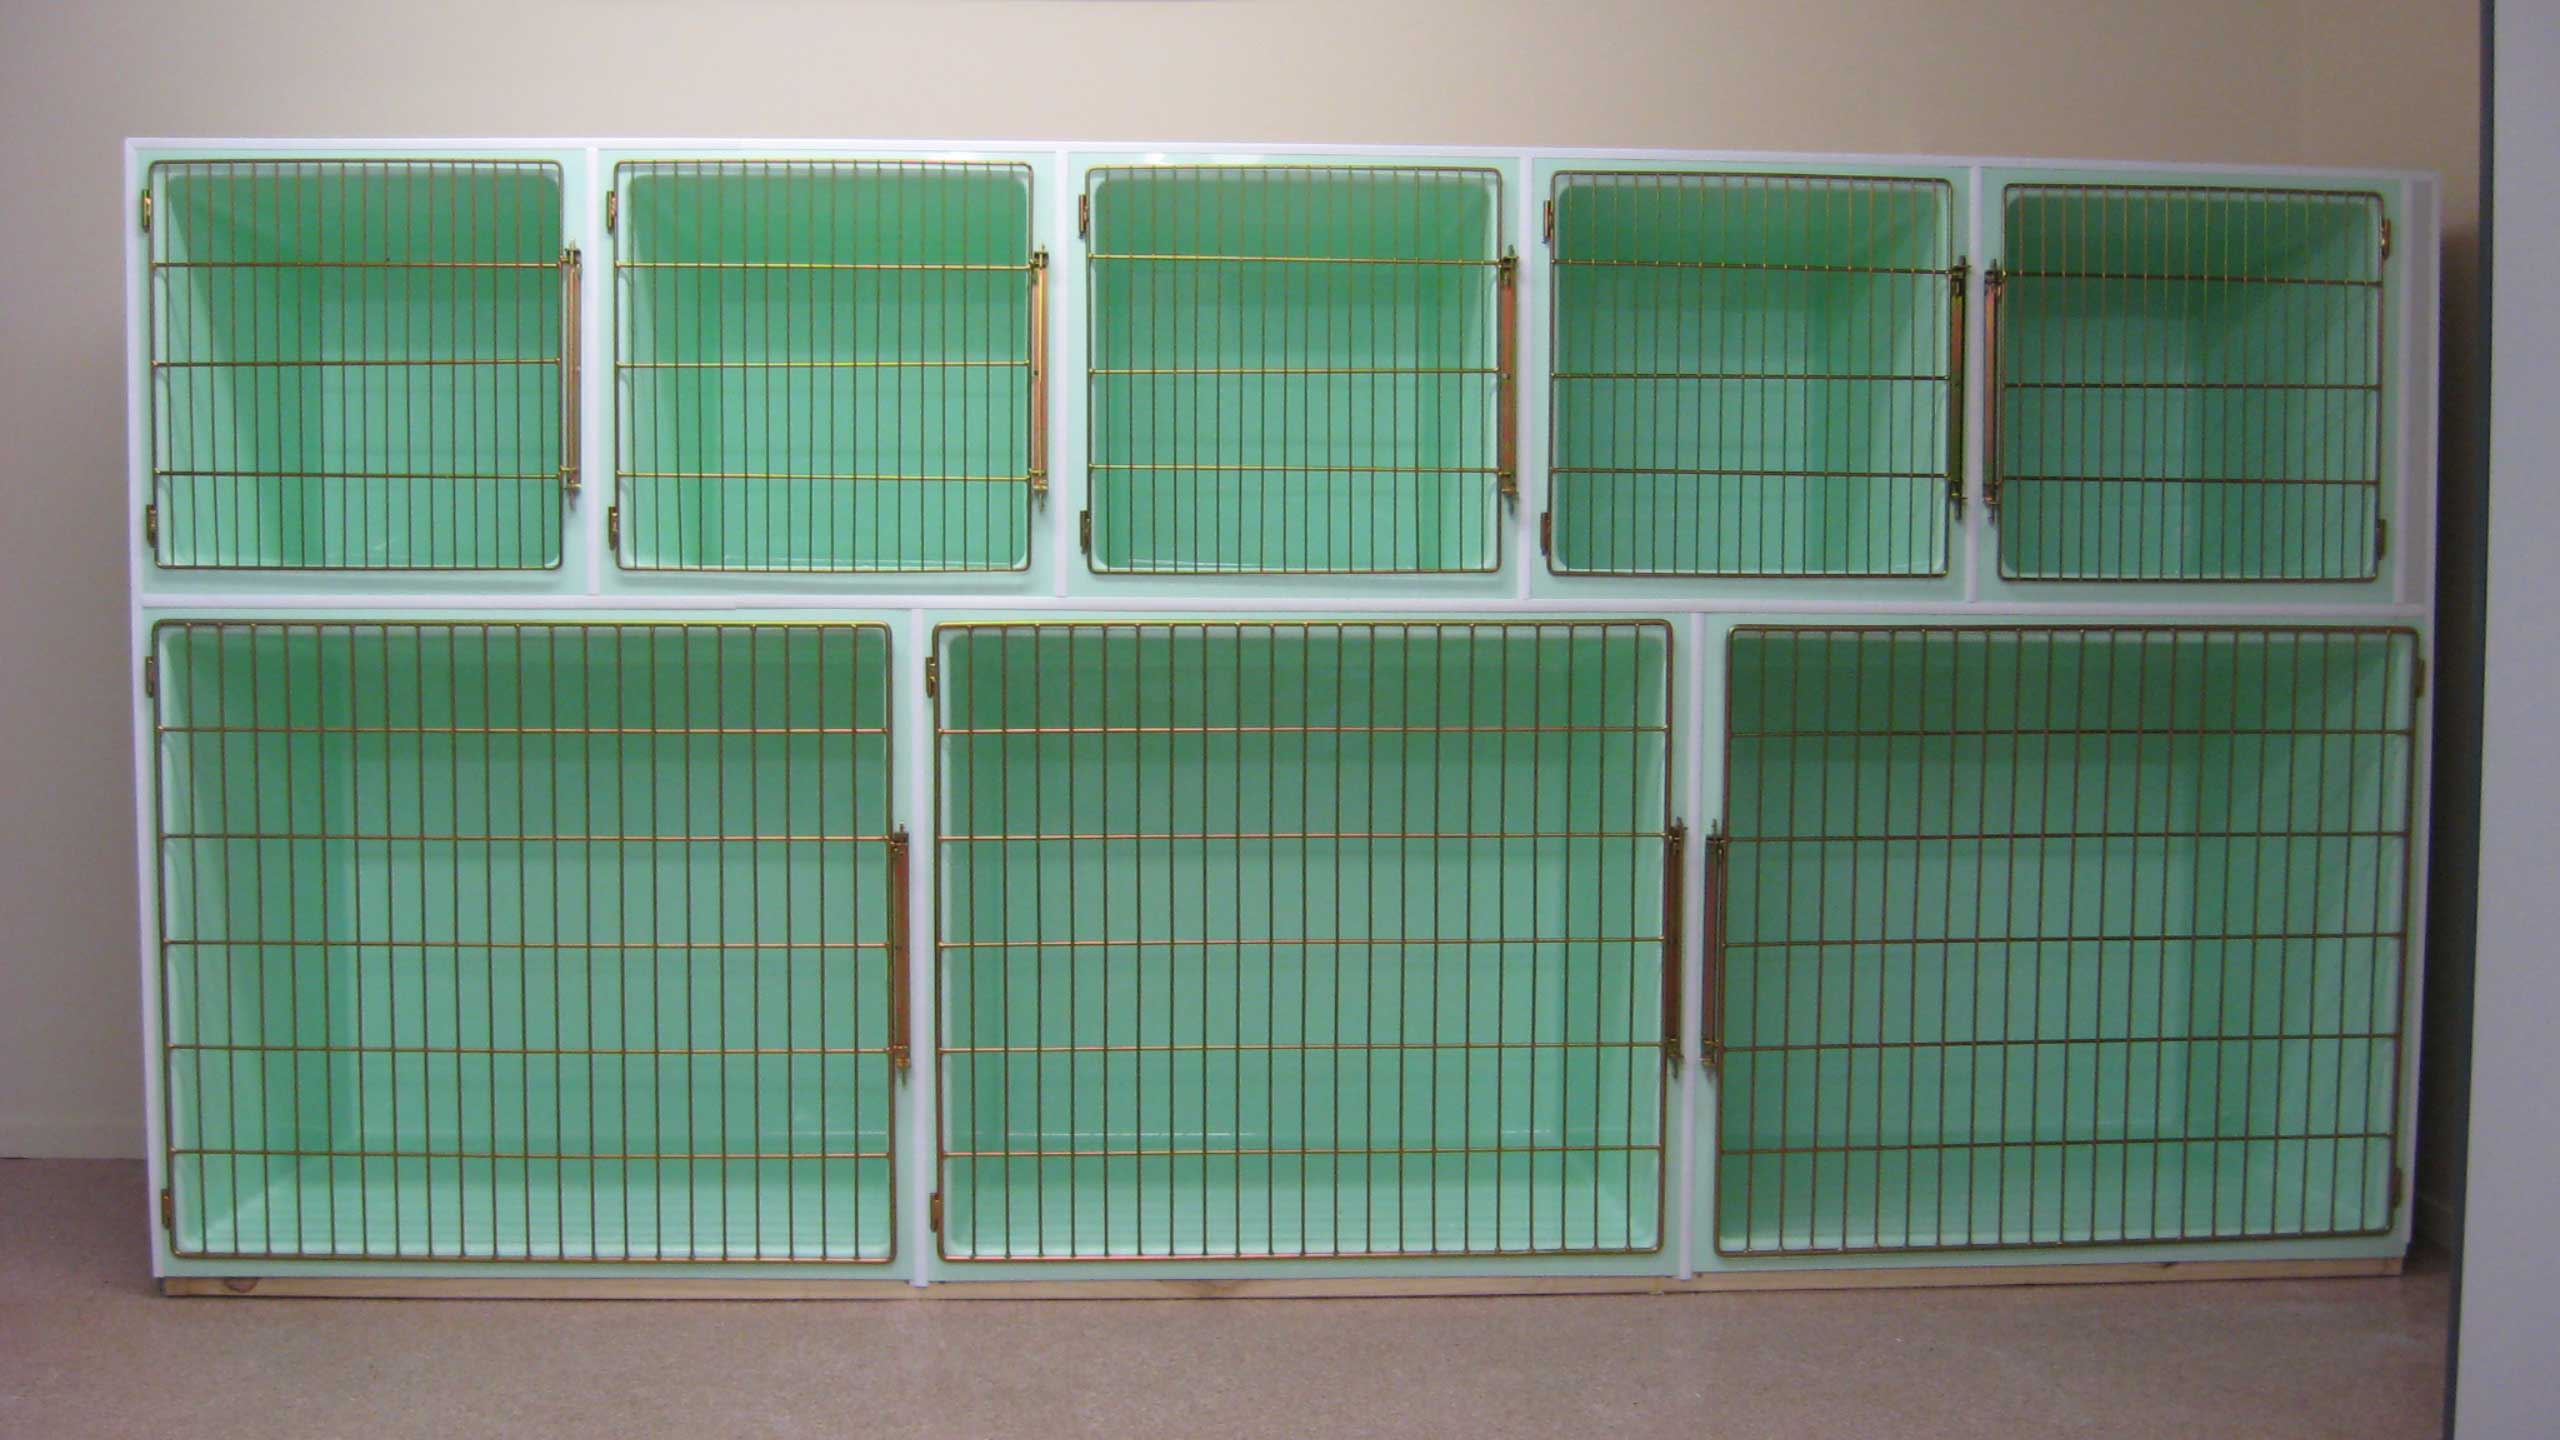 Creature Comfort Cages cage bank: 5 x Cat Cages (top), 3 x Large Dog Cages (bottom)